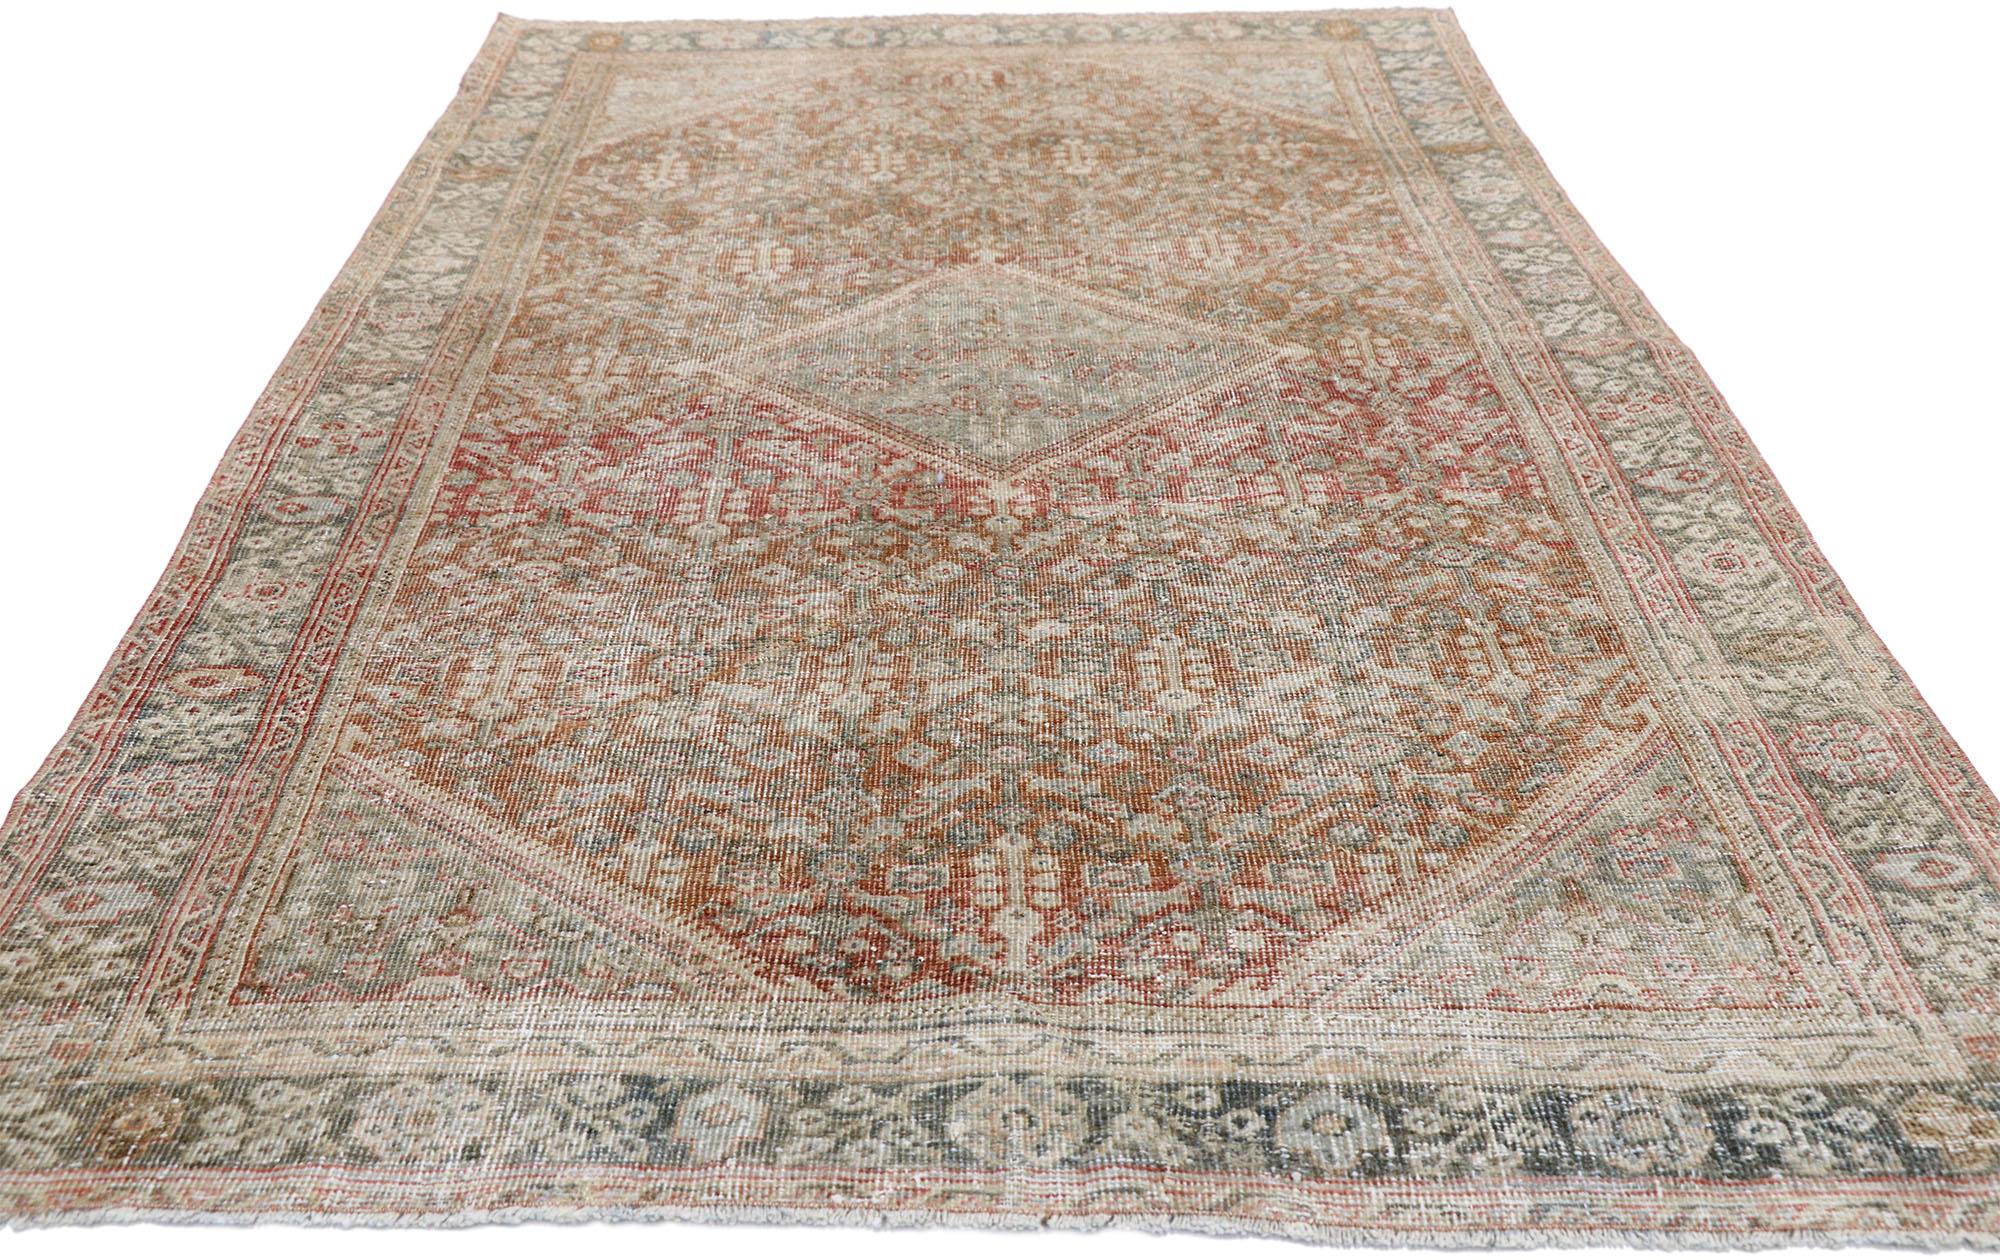 Turkish Distressed Antique Persian Mahal Design Rug with Modern Rustic Belgian Style